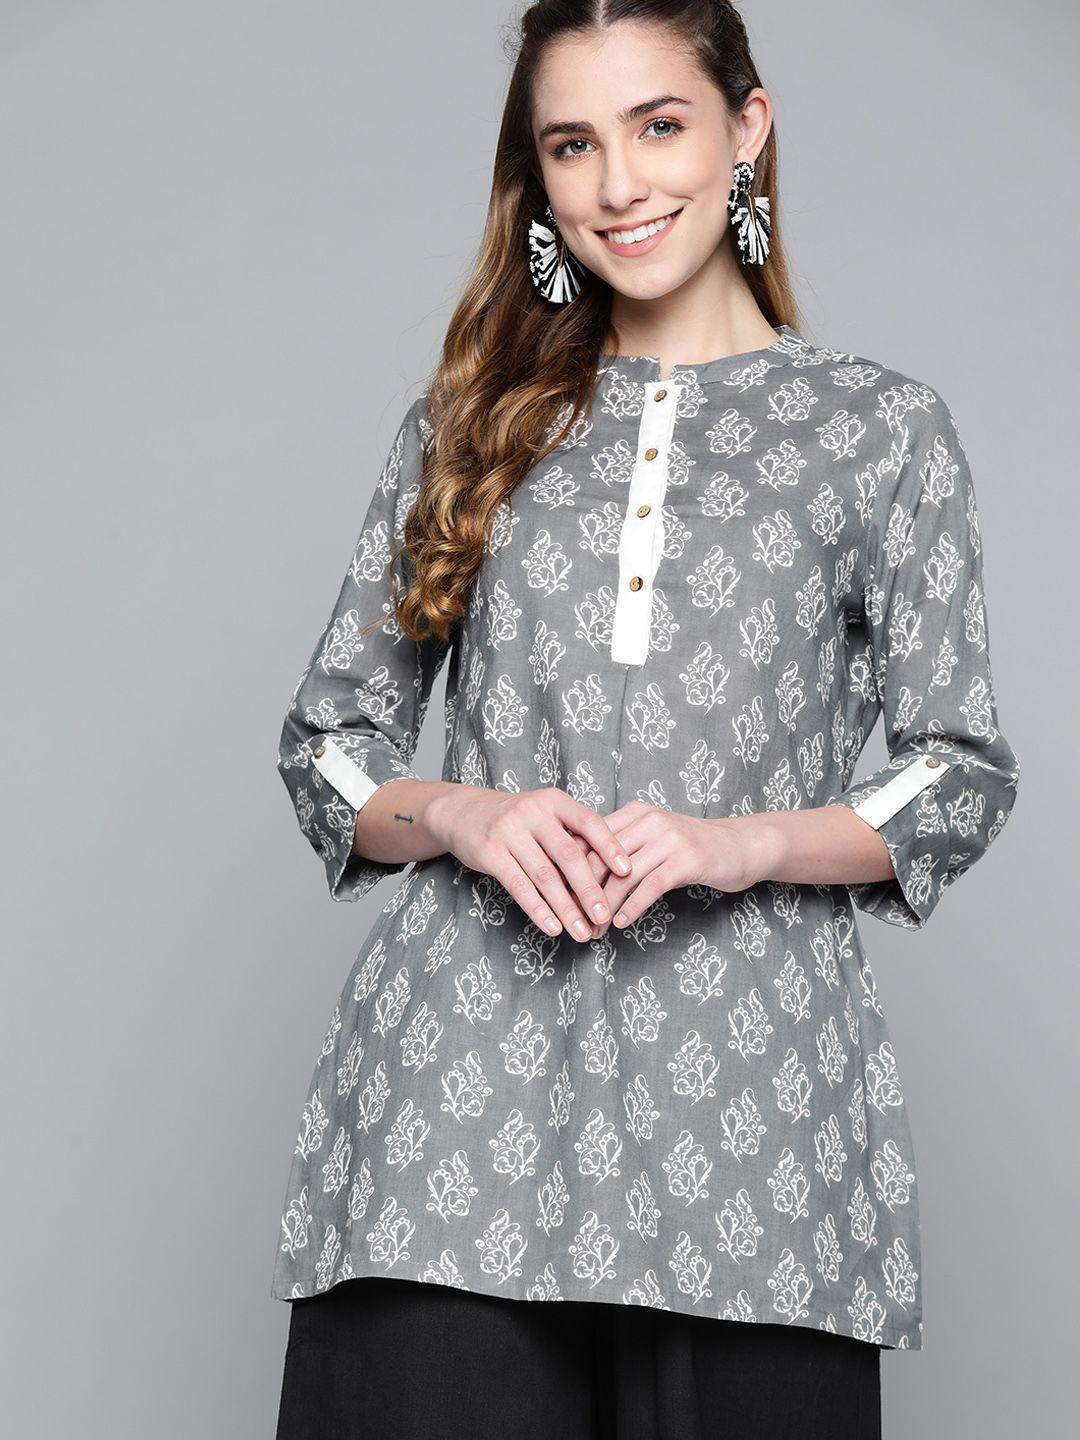 here&now grey & white floral print pure cotton kurti